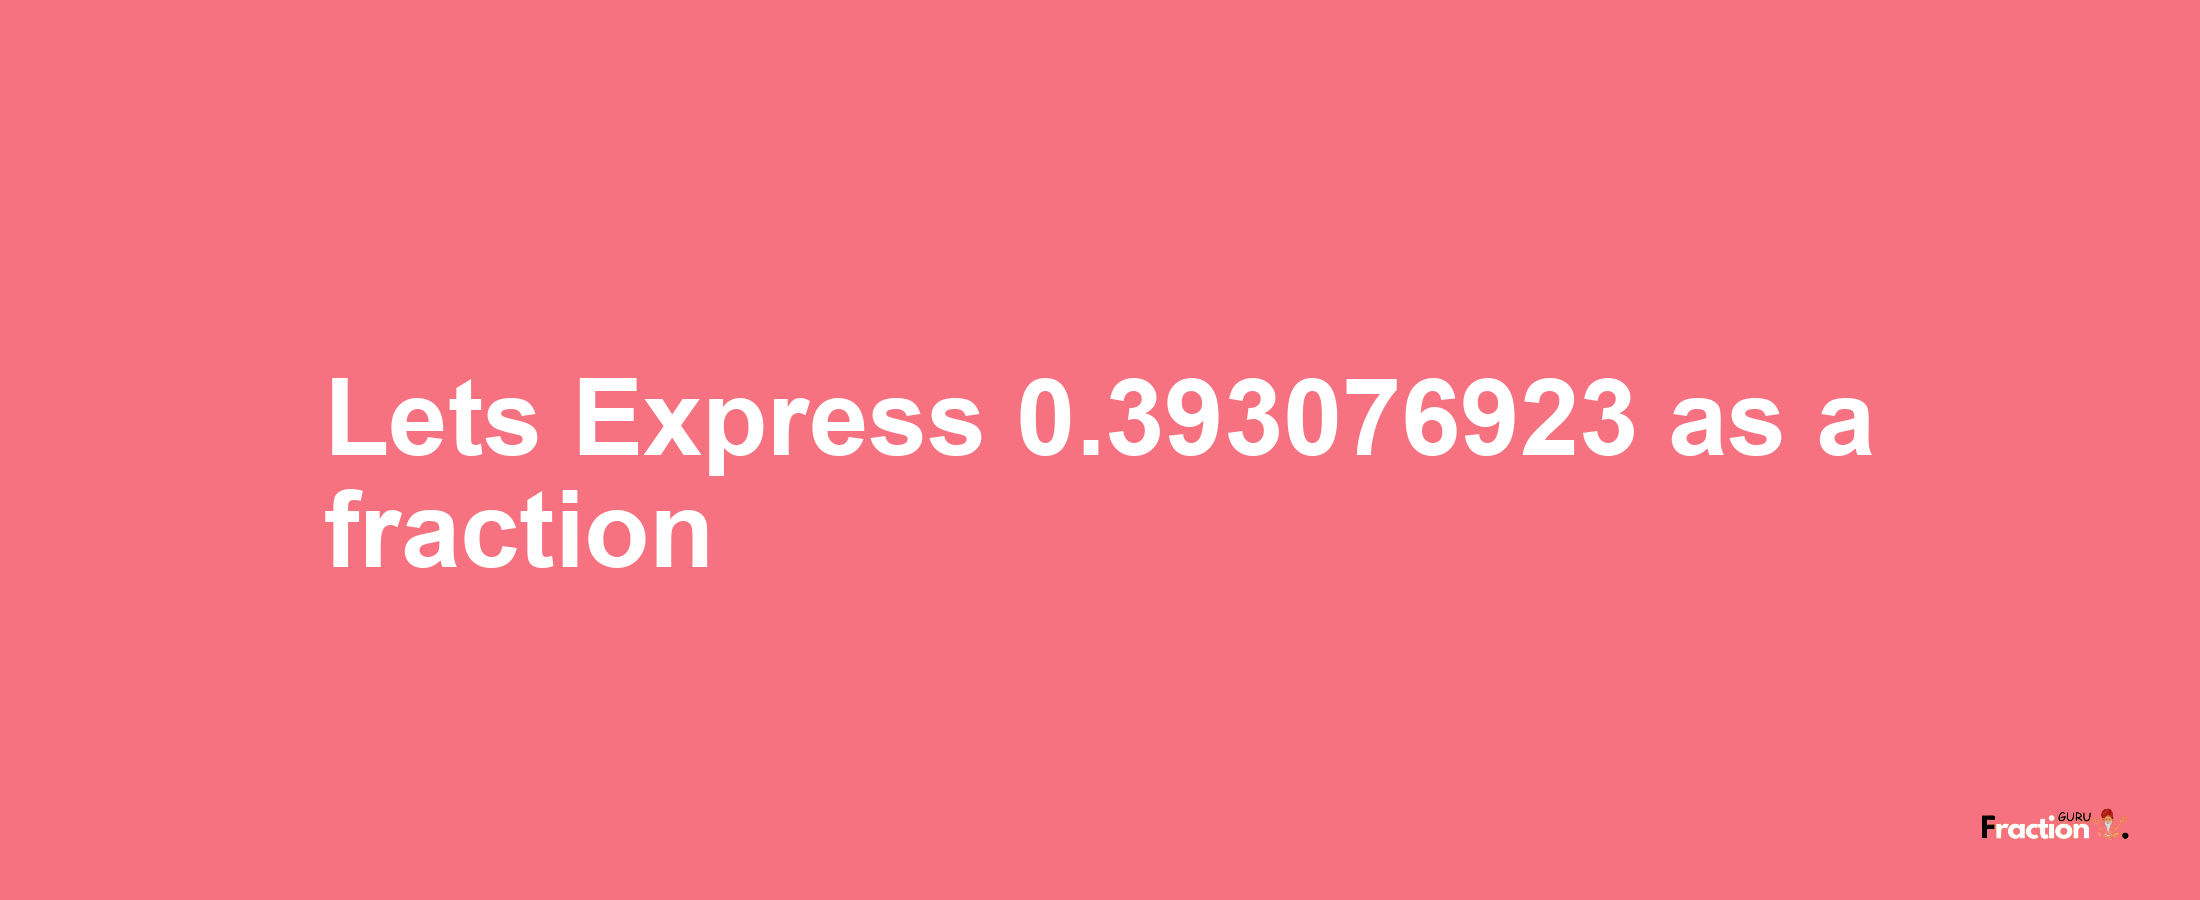 Lets Express 0.393076923 as afraction